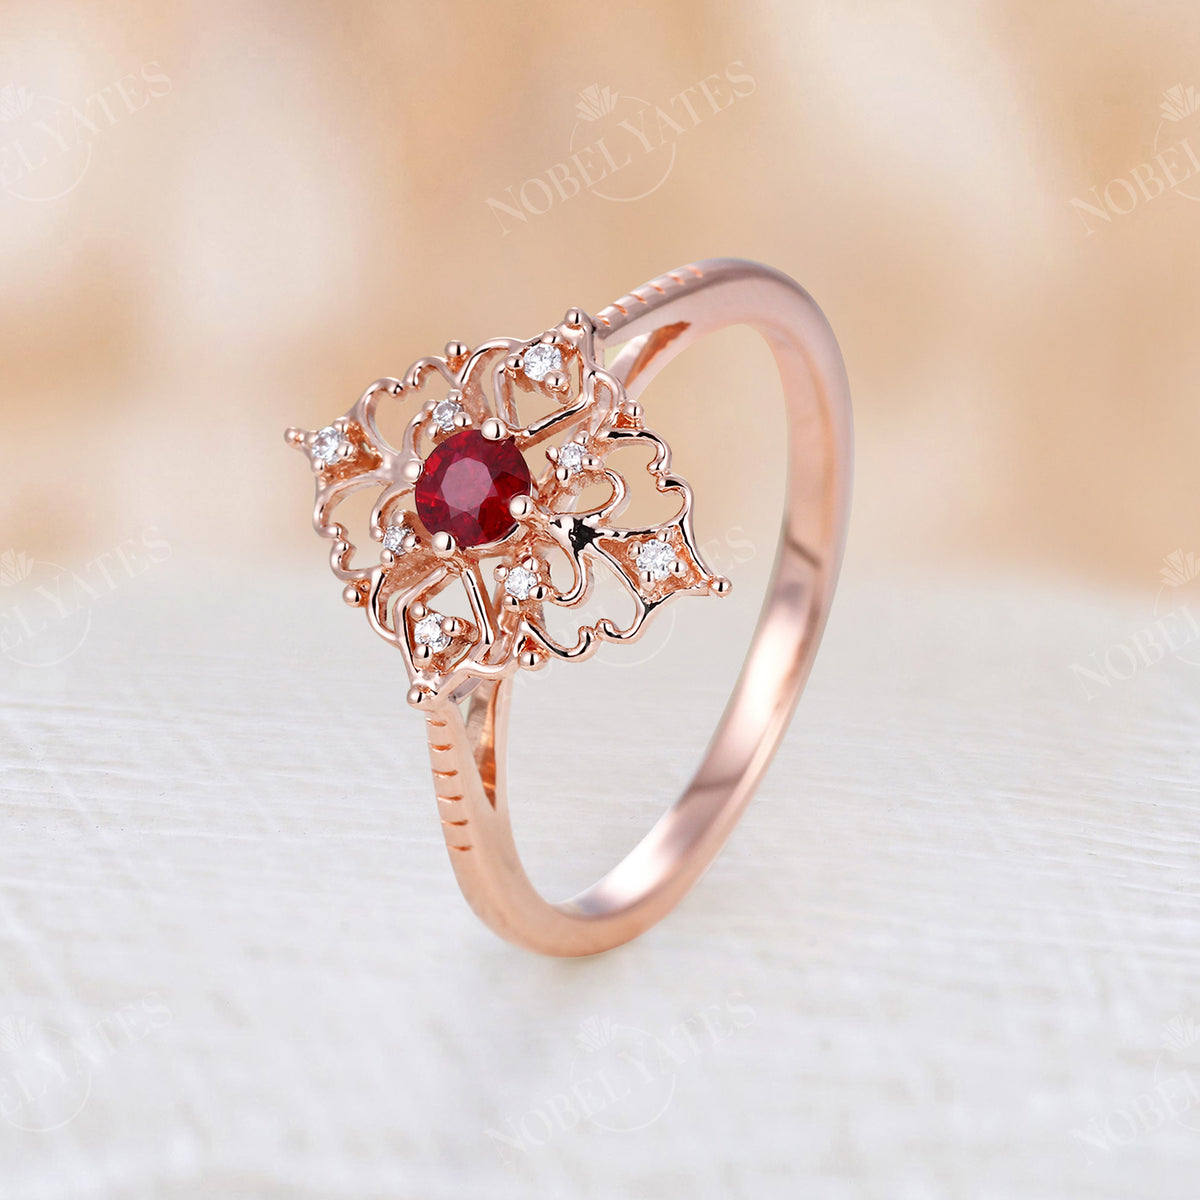 Vintage Round Cut Natural Ruby Engagement Ring Rose Gold